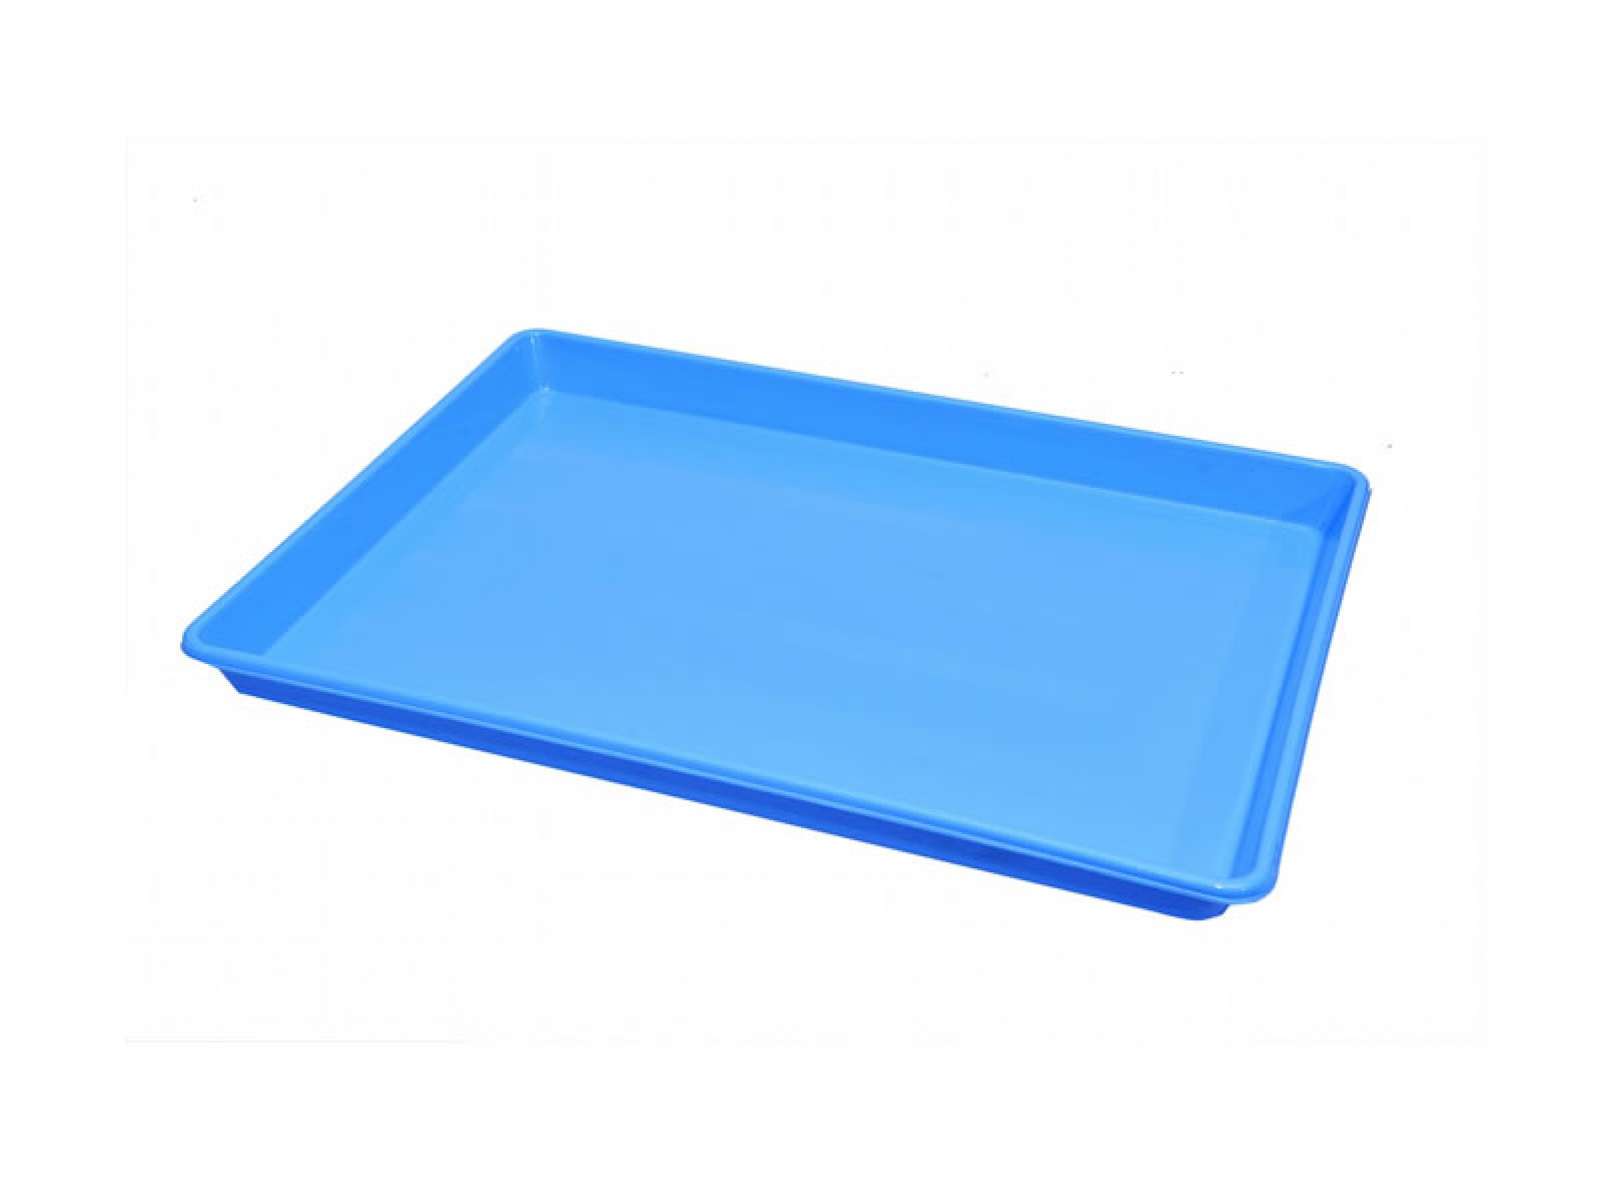 Square Tray with Stripes pattern